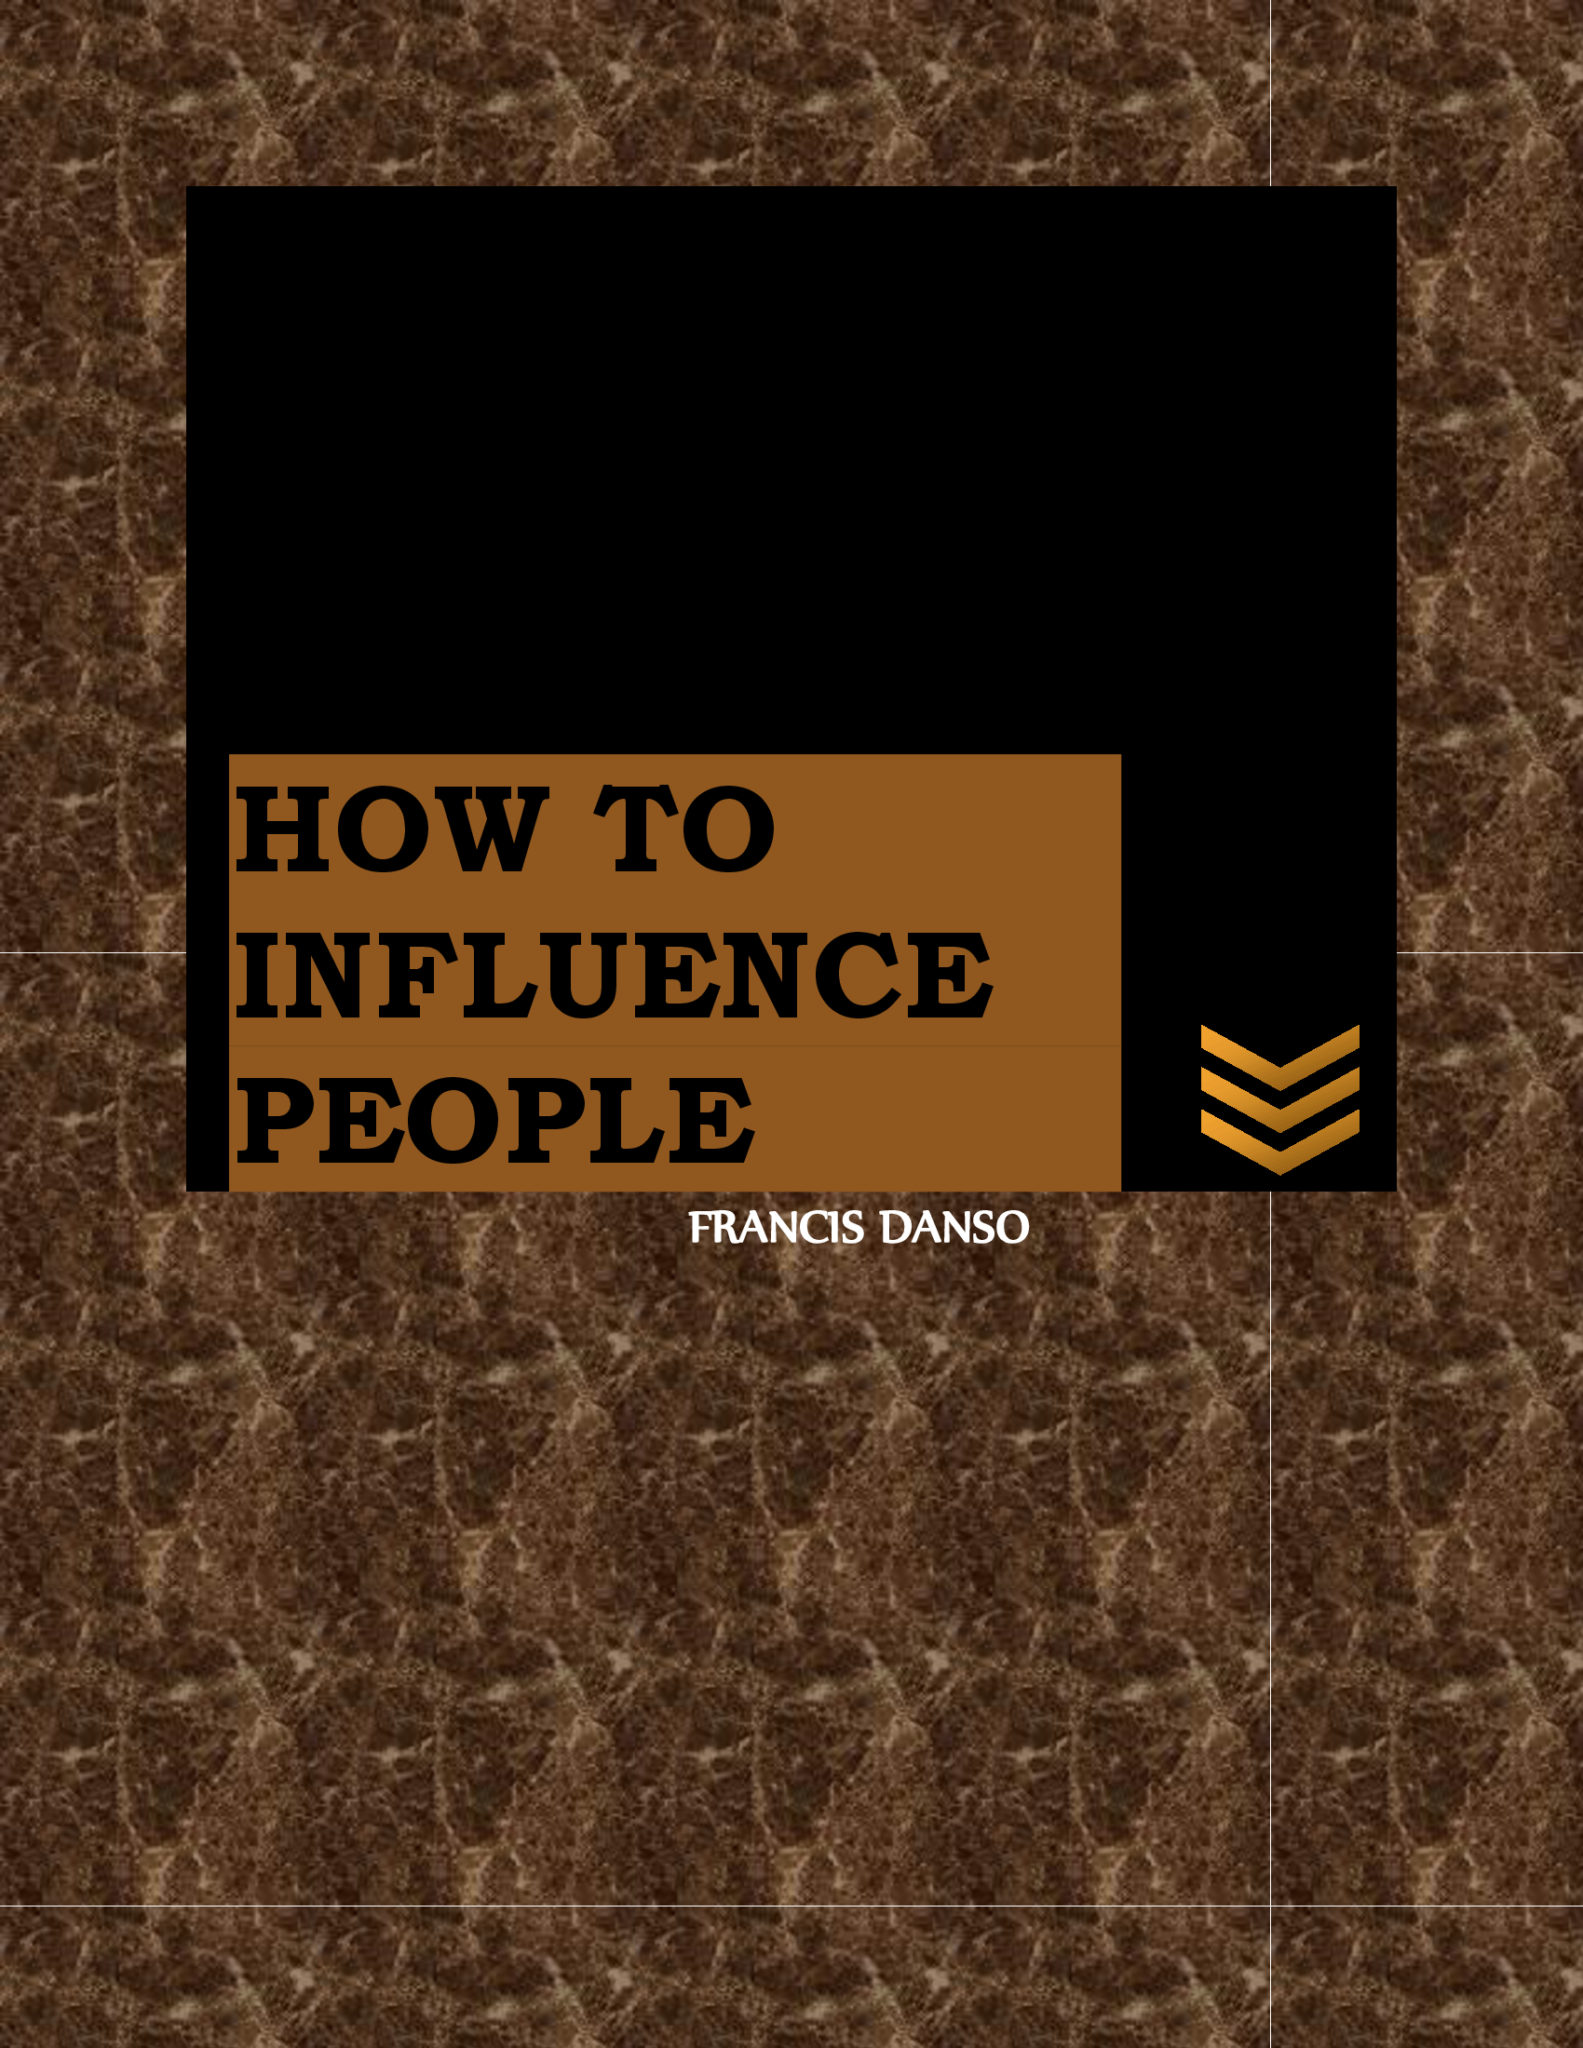 FREE: HOW TO INFLUENCE PEOPLE by francis danso